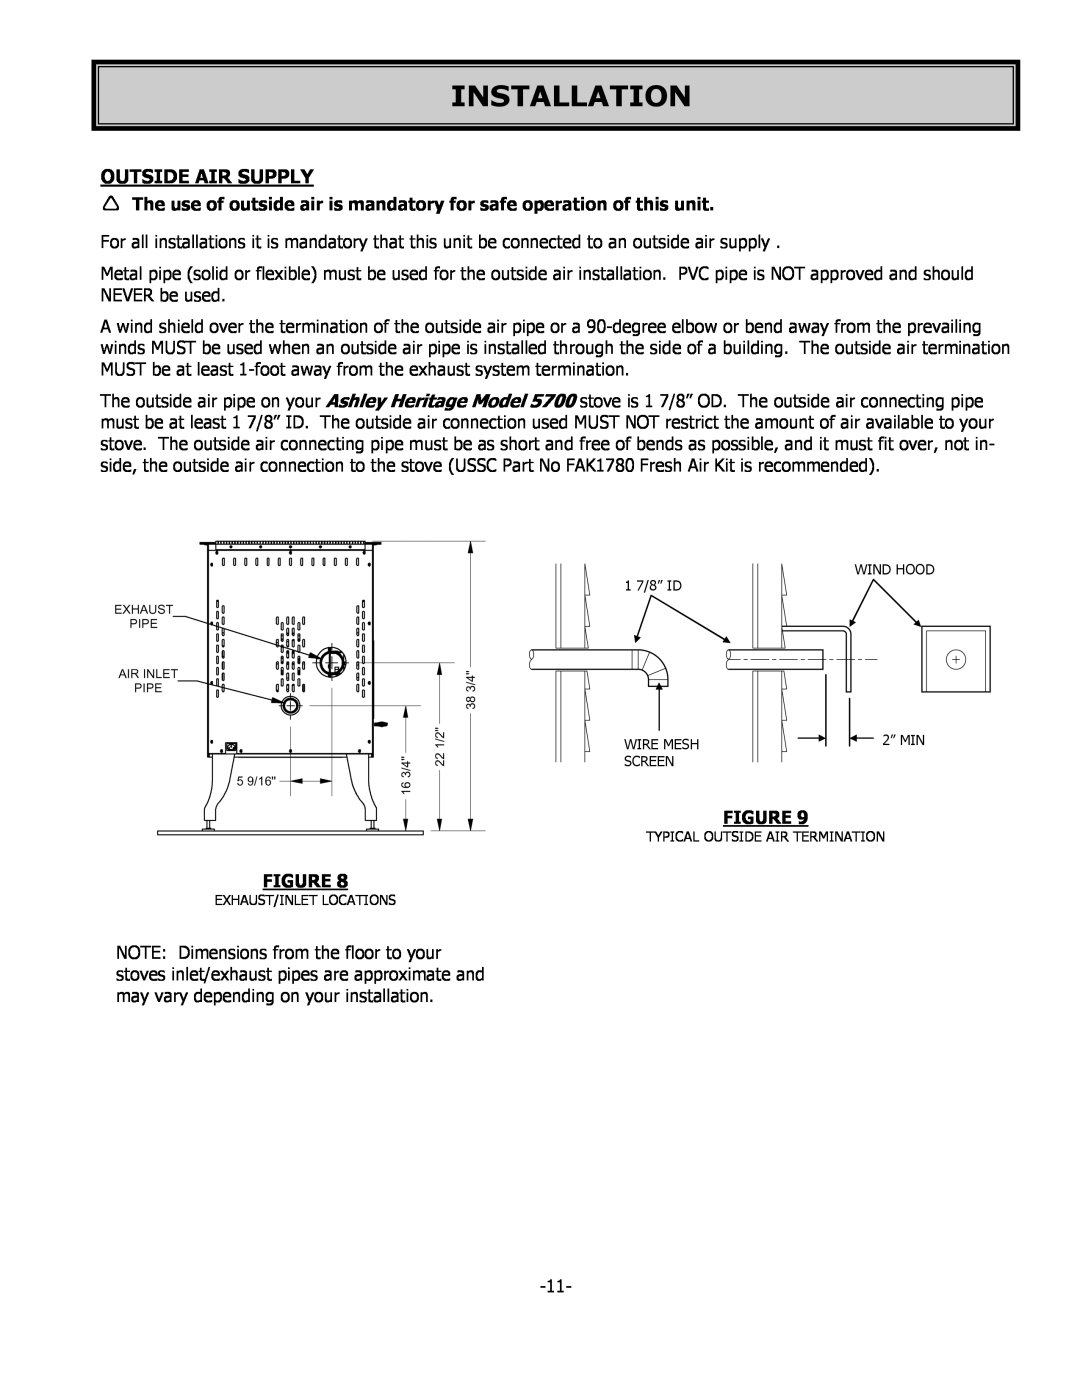 United States Stove 5700 owner manual Outside Air Supply, Installation 